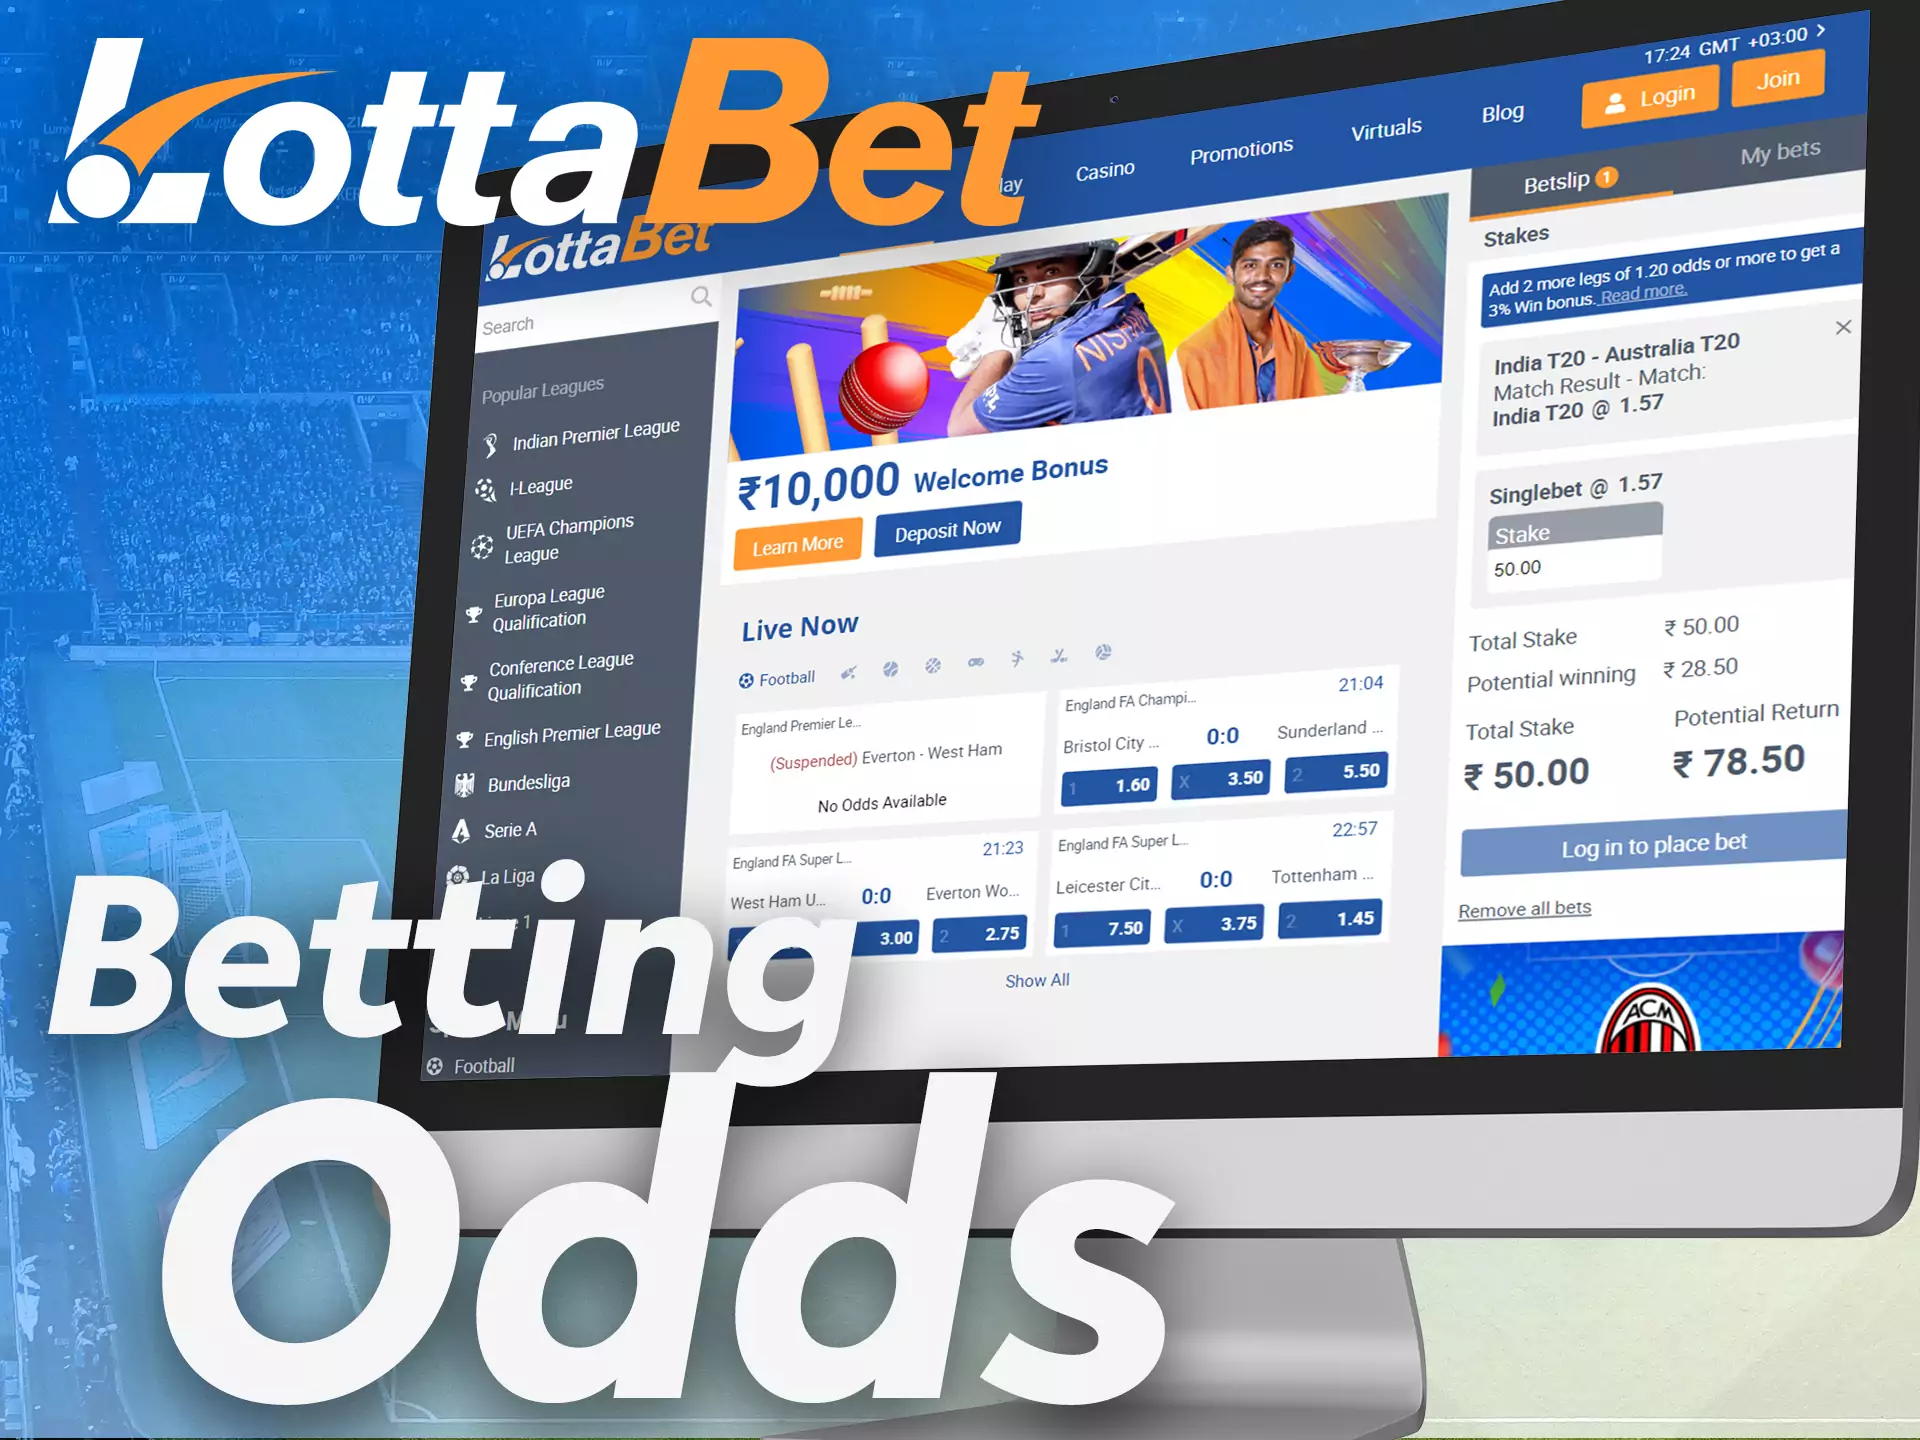 The high odds are one of the benefits of betting on Lottabet.